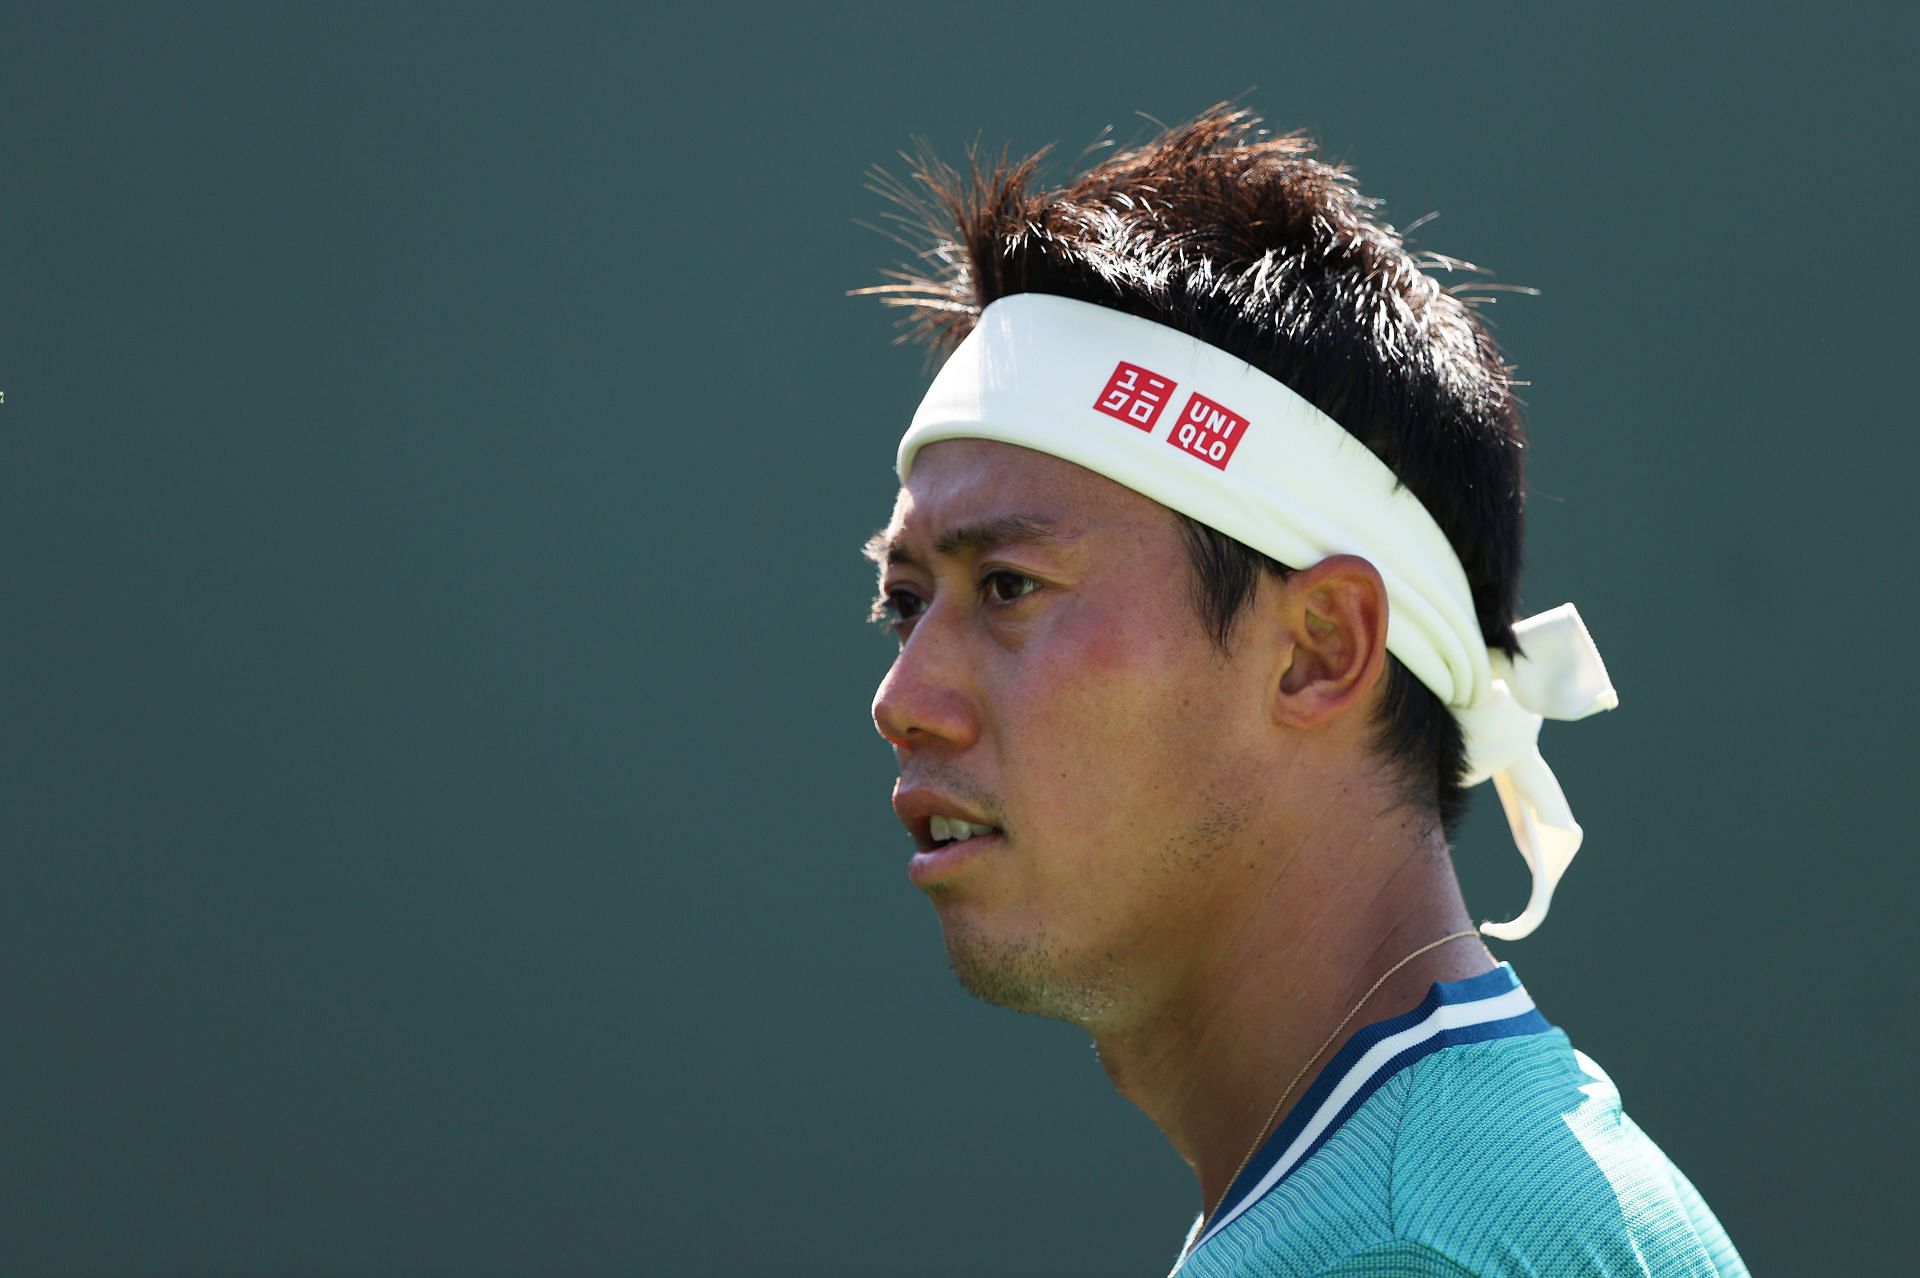 The Japanese in action. Photo by Clive Brunskill/Getty Images